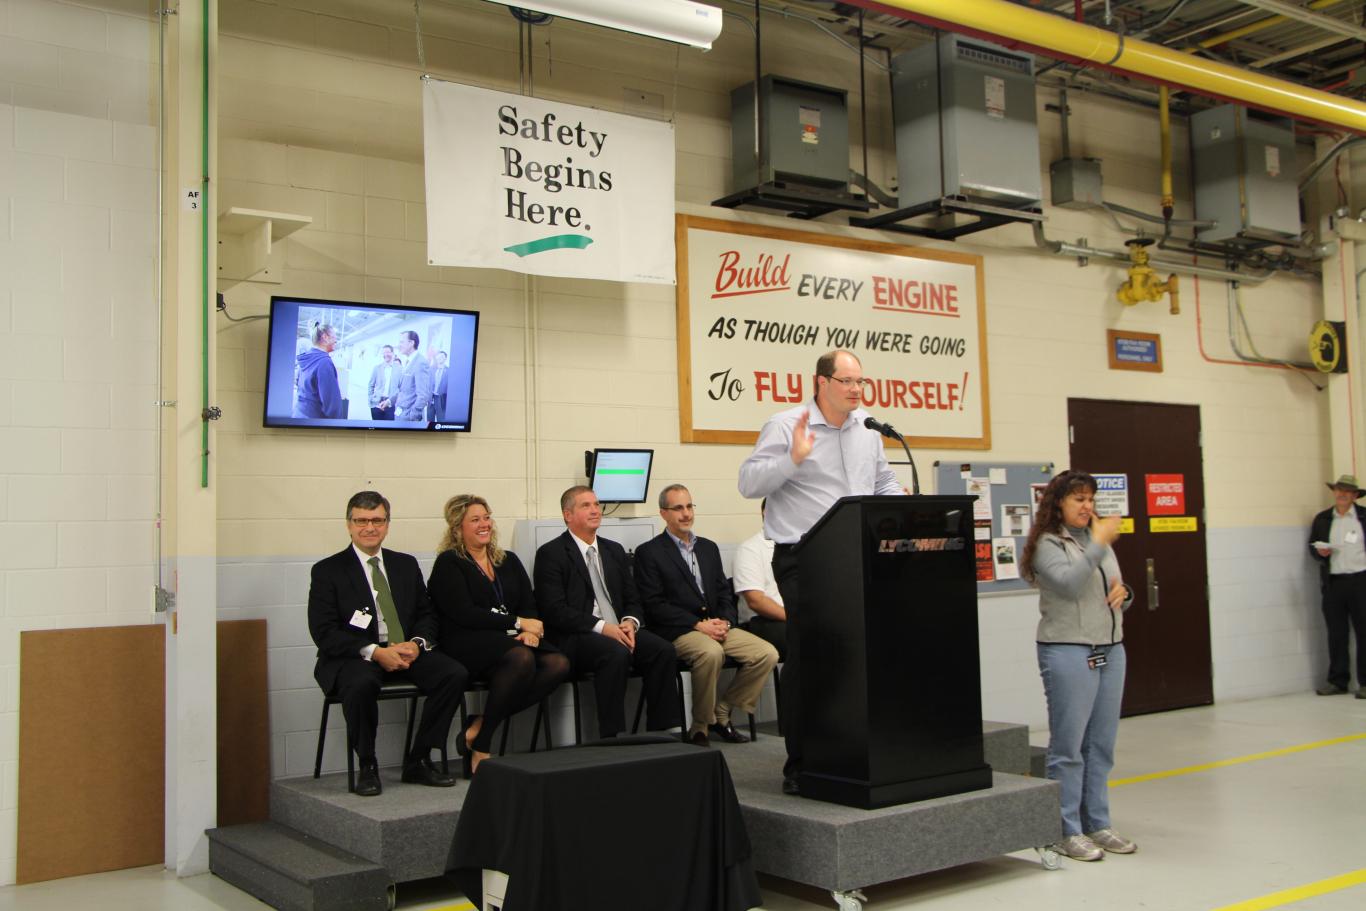 Scott Witmer, Lycoming's Environmental Health and Safety Manager, addresses employees at award presentation.